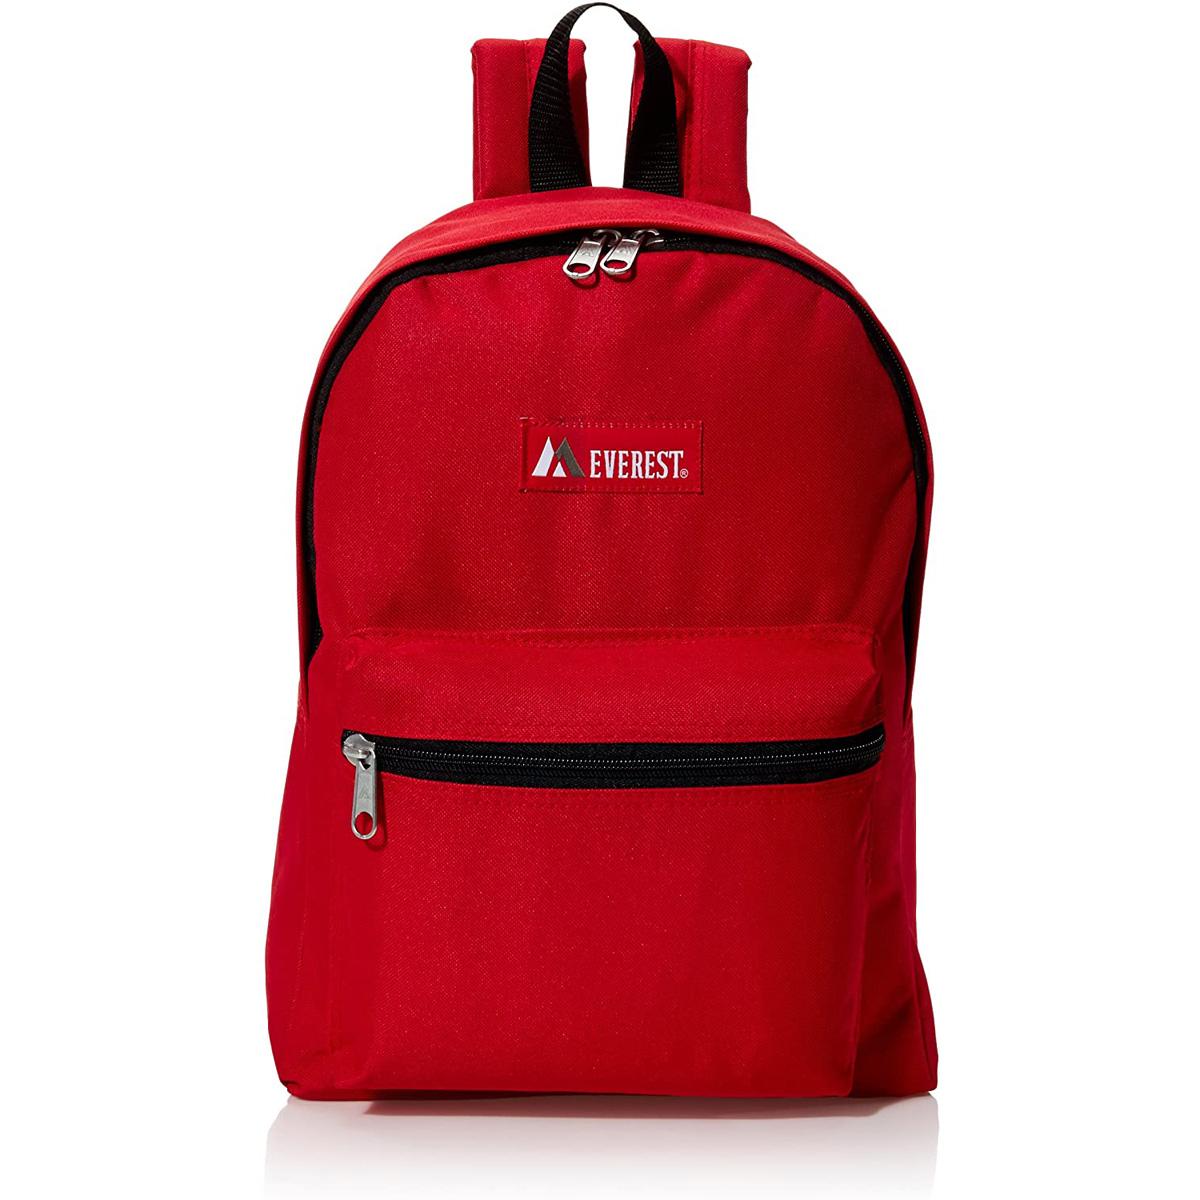 Everest Classic Backpack for $6.40